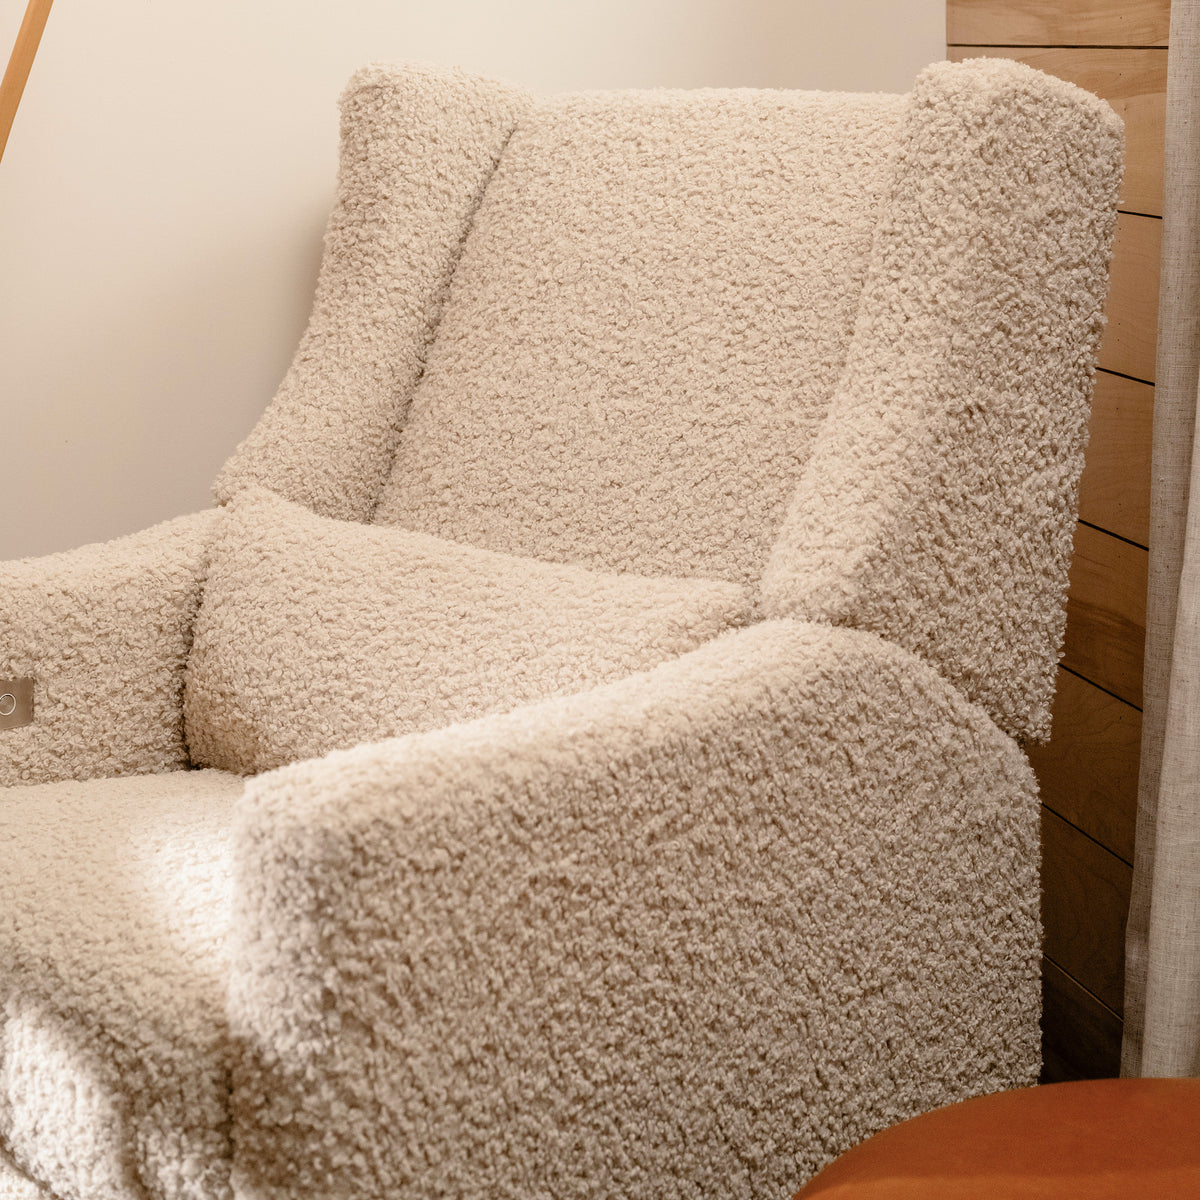 Kiwi Electronic Recliner + Swivel Glider in Eco-Performance Fabric with USB Port - Teddy Loop